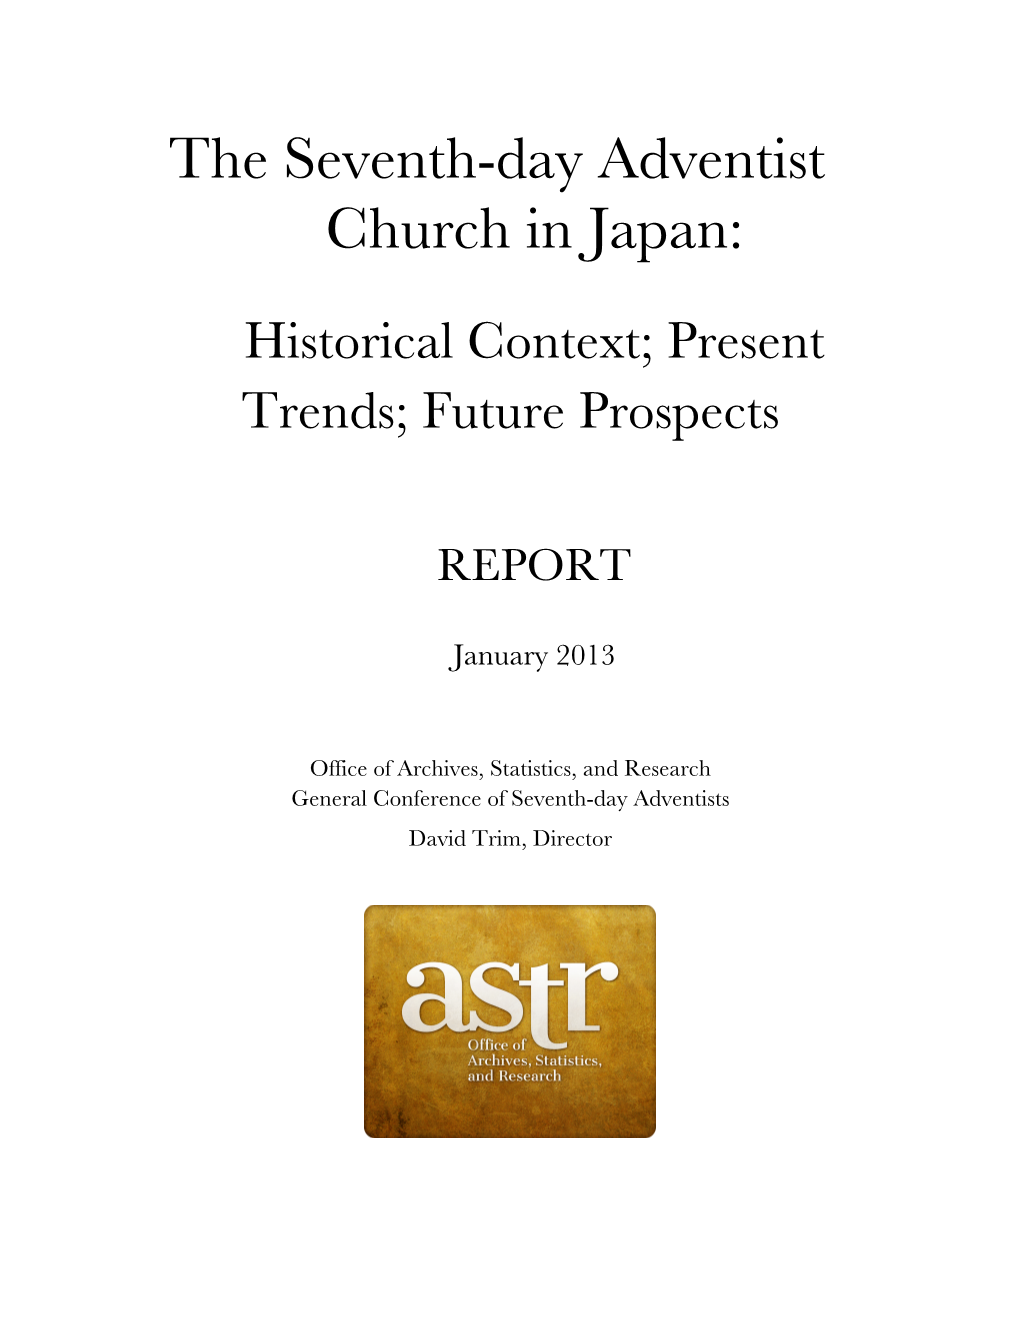 The Seventh-Day Adventist Church in Japan: Historical Context